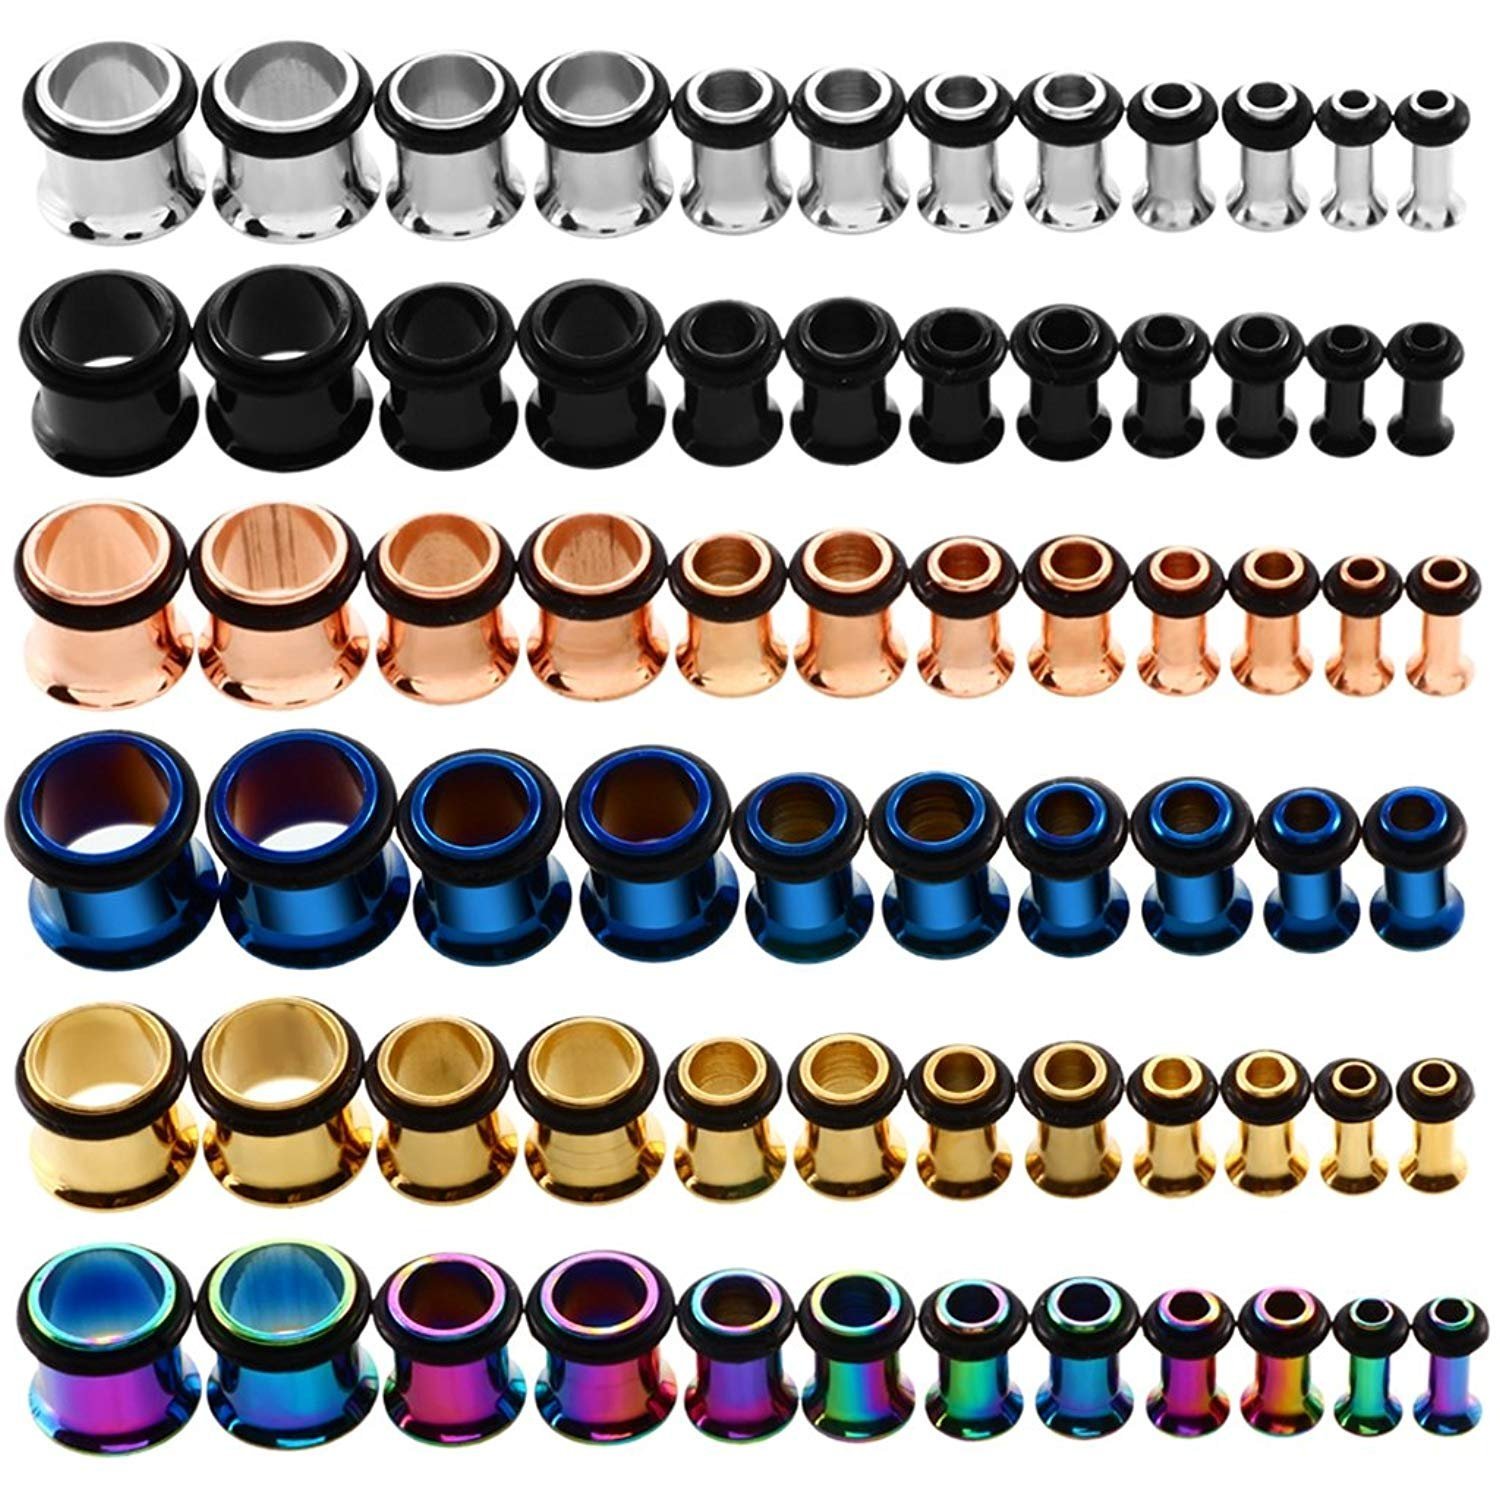 luxe  KUBOOZ 9 Pairs Stainless Steel Single Flare Ear Plugs Kit Tunnels Gauges Stretcher Piercings Unisex Size 14G-00G 9UXW8TFds mode